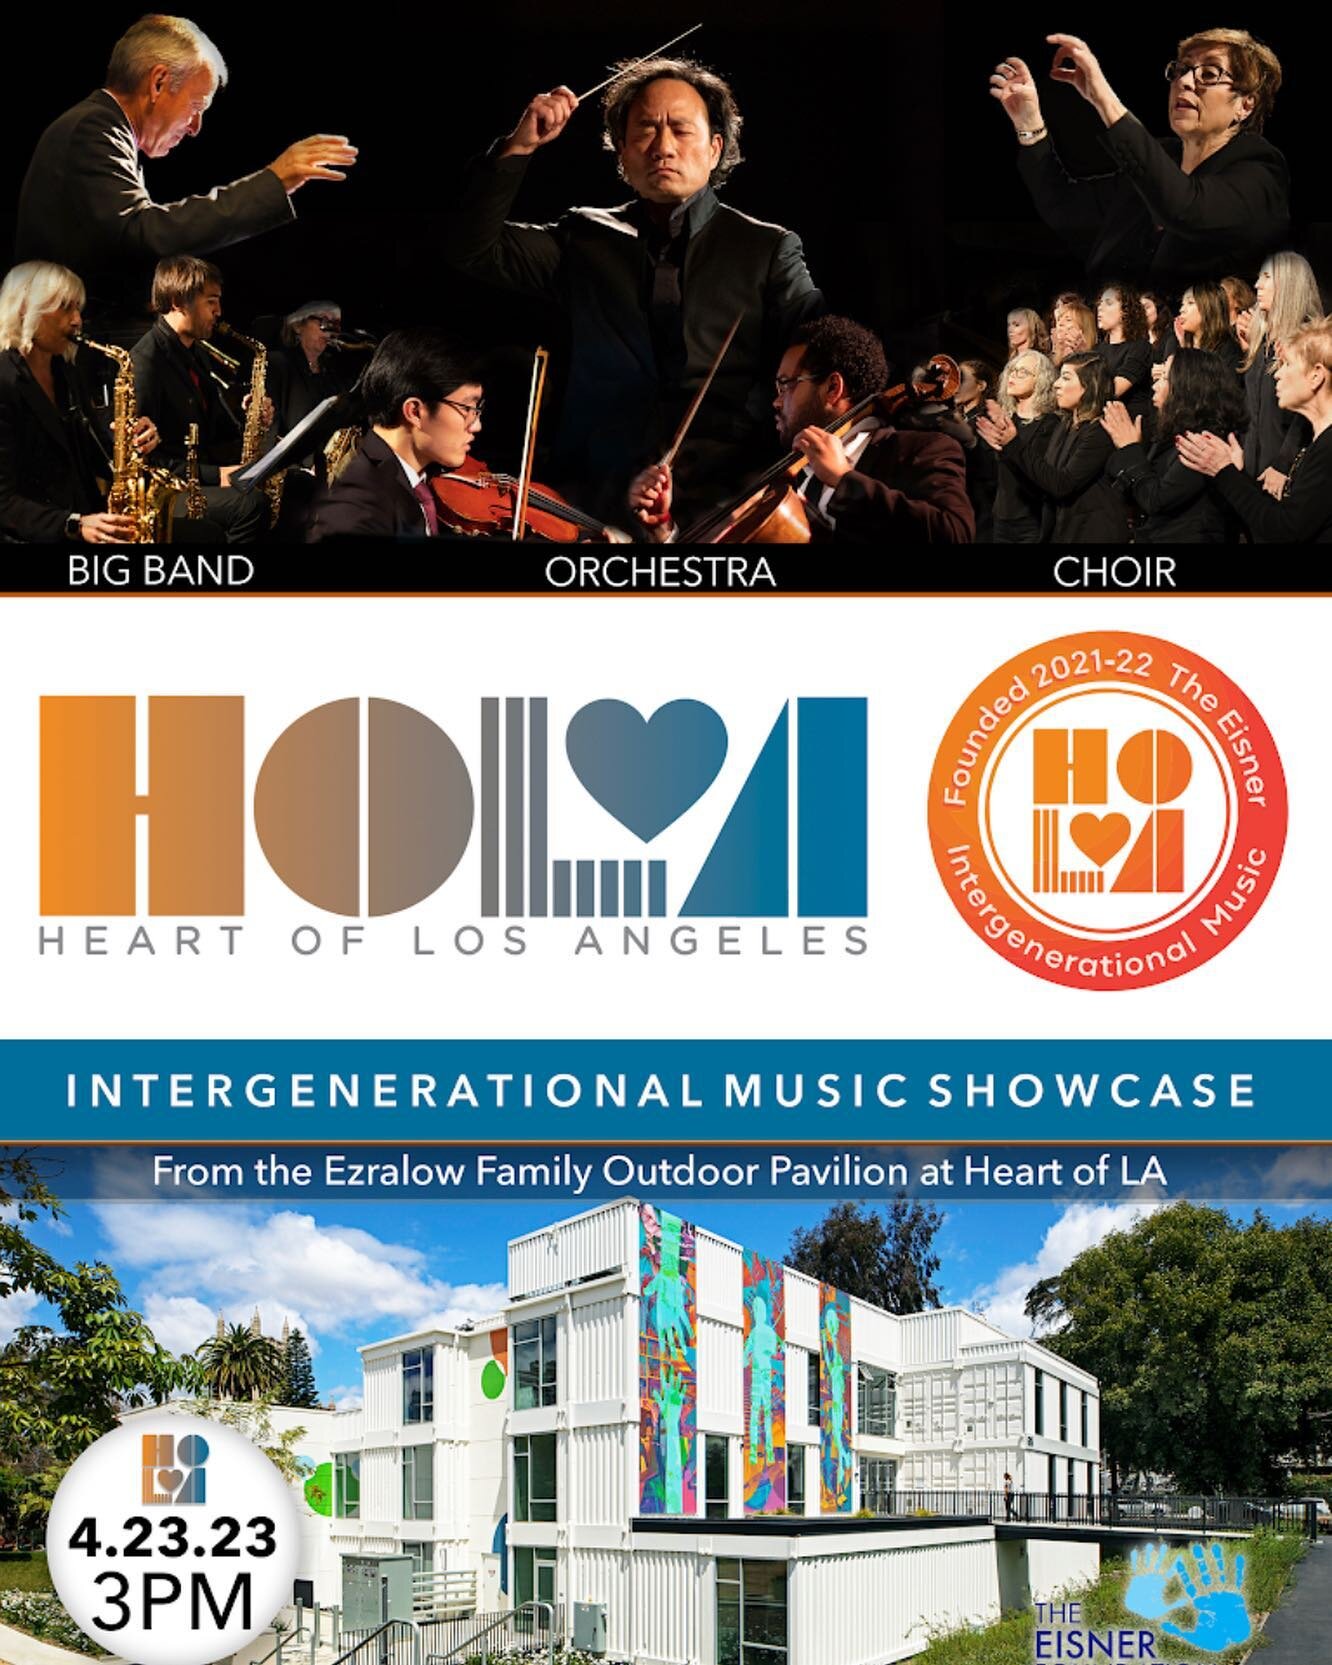 CONCERT ALERT! Enjoy some music in the park and come to Heart of LA on April 23 to watch the Intergenerational Music Showcase (featuring our Big Band, Orchestra, and Choir) 🎶 Tickets in bio!

#heartofla #orchestra #choir #bigband #classical #contemp